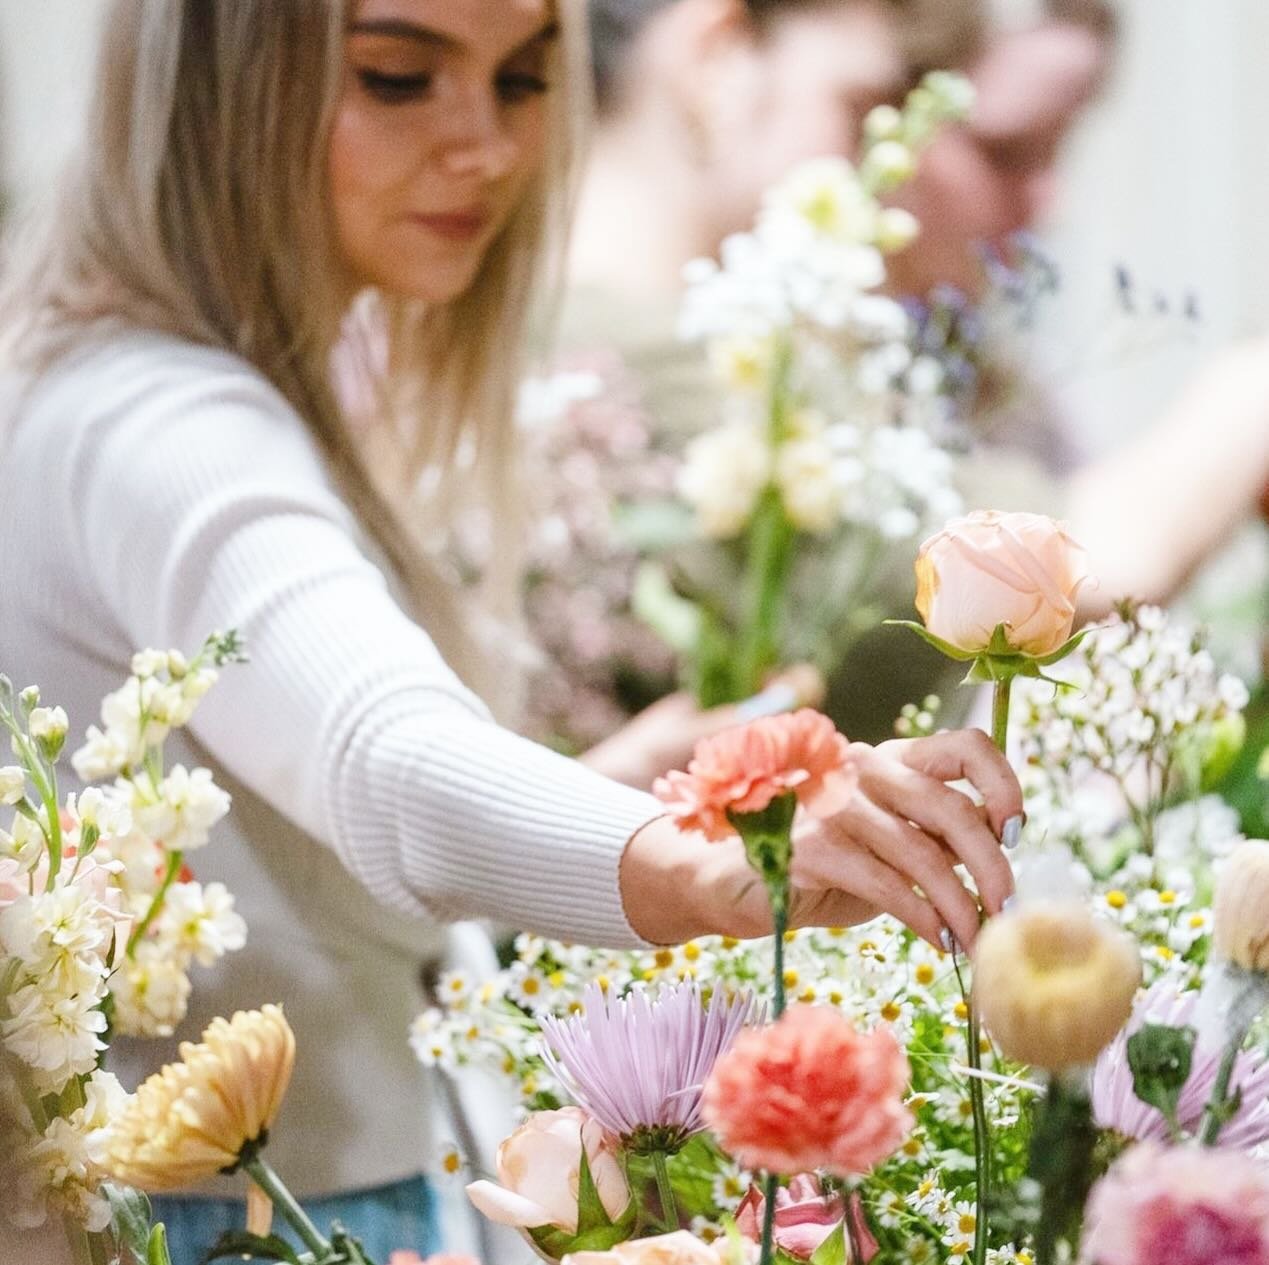 🌷 JG Bouquet Bar 🌷

This past February I had the joy of hosting a bouquet making night for the wonderful ladies of @txbaptcollege ! 
Such a beautiful event organized by the amazing @katelynwestcanady 

About the Bouquet Bar experience ✨
From intima